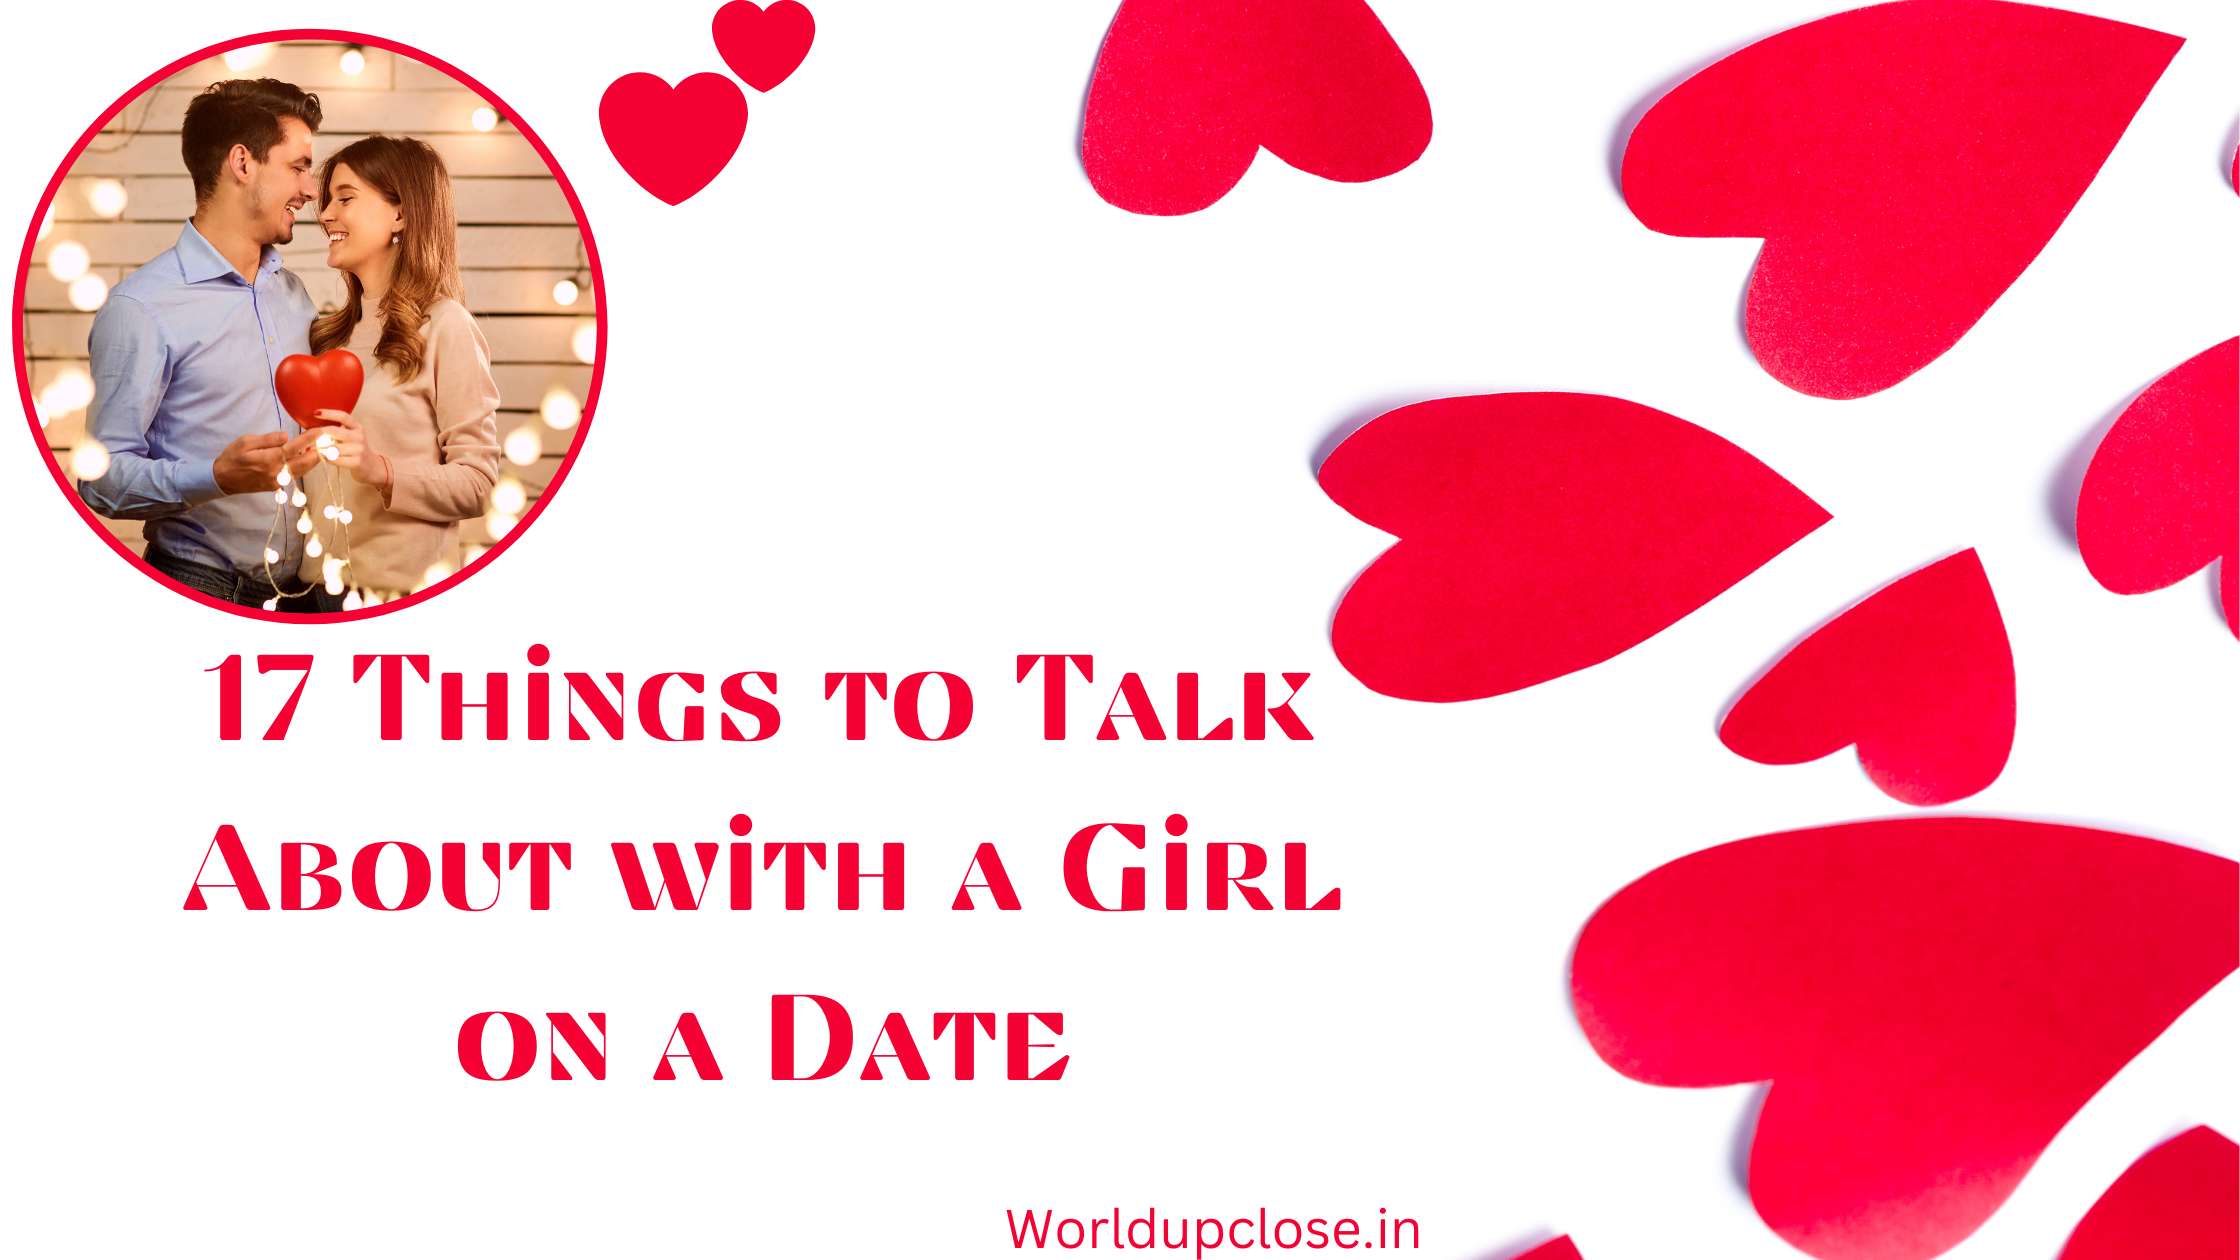 17 Things to Talk About with a Girl on a Date 49